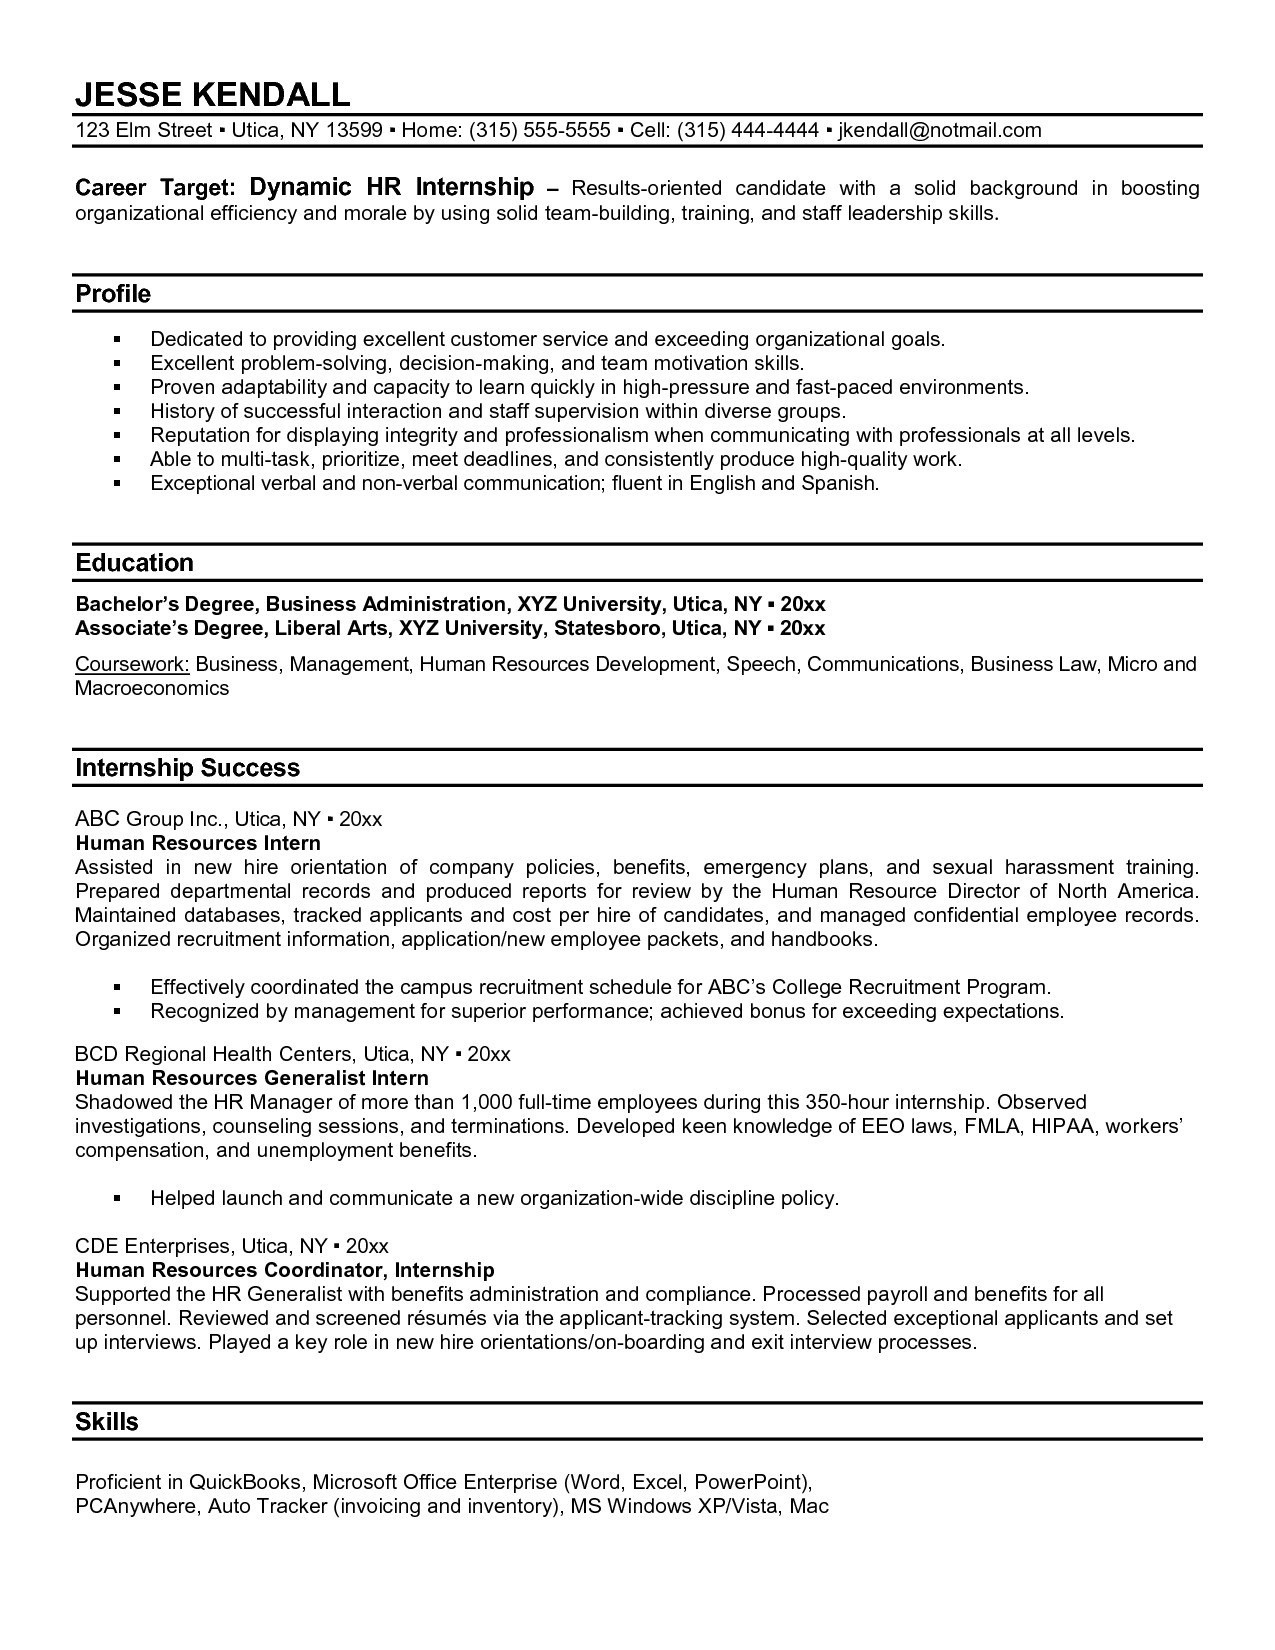 Cover Letter Template for Human Resources - Human Resource Manager Resume Inspirational Job Application Letter